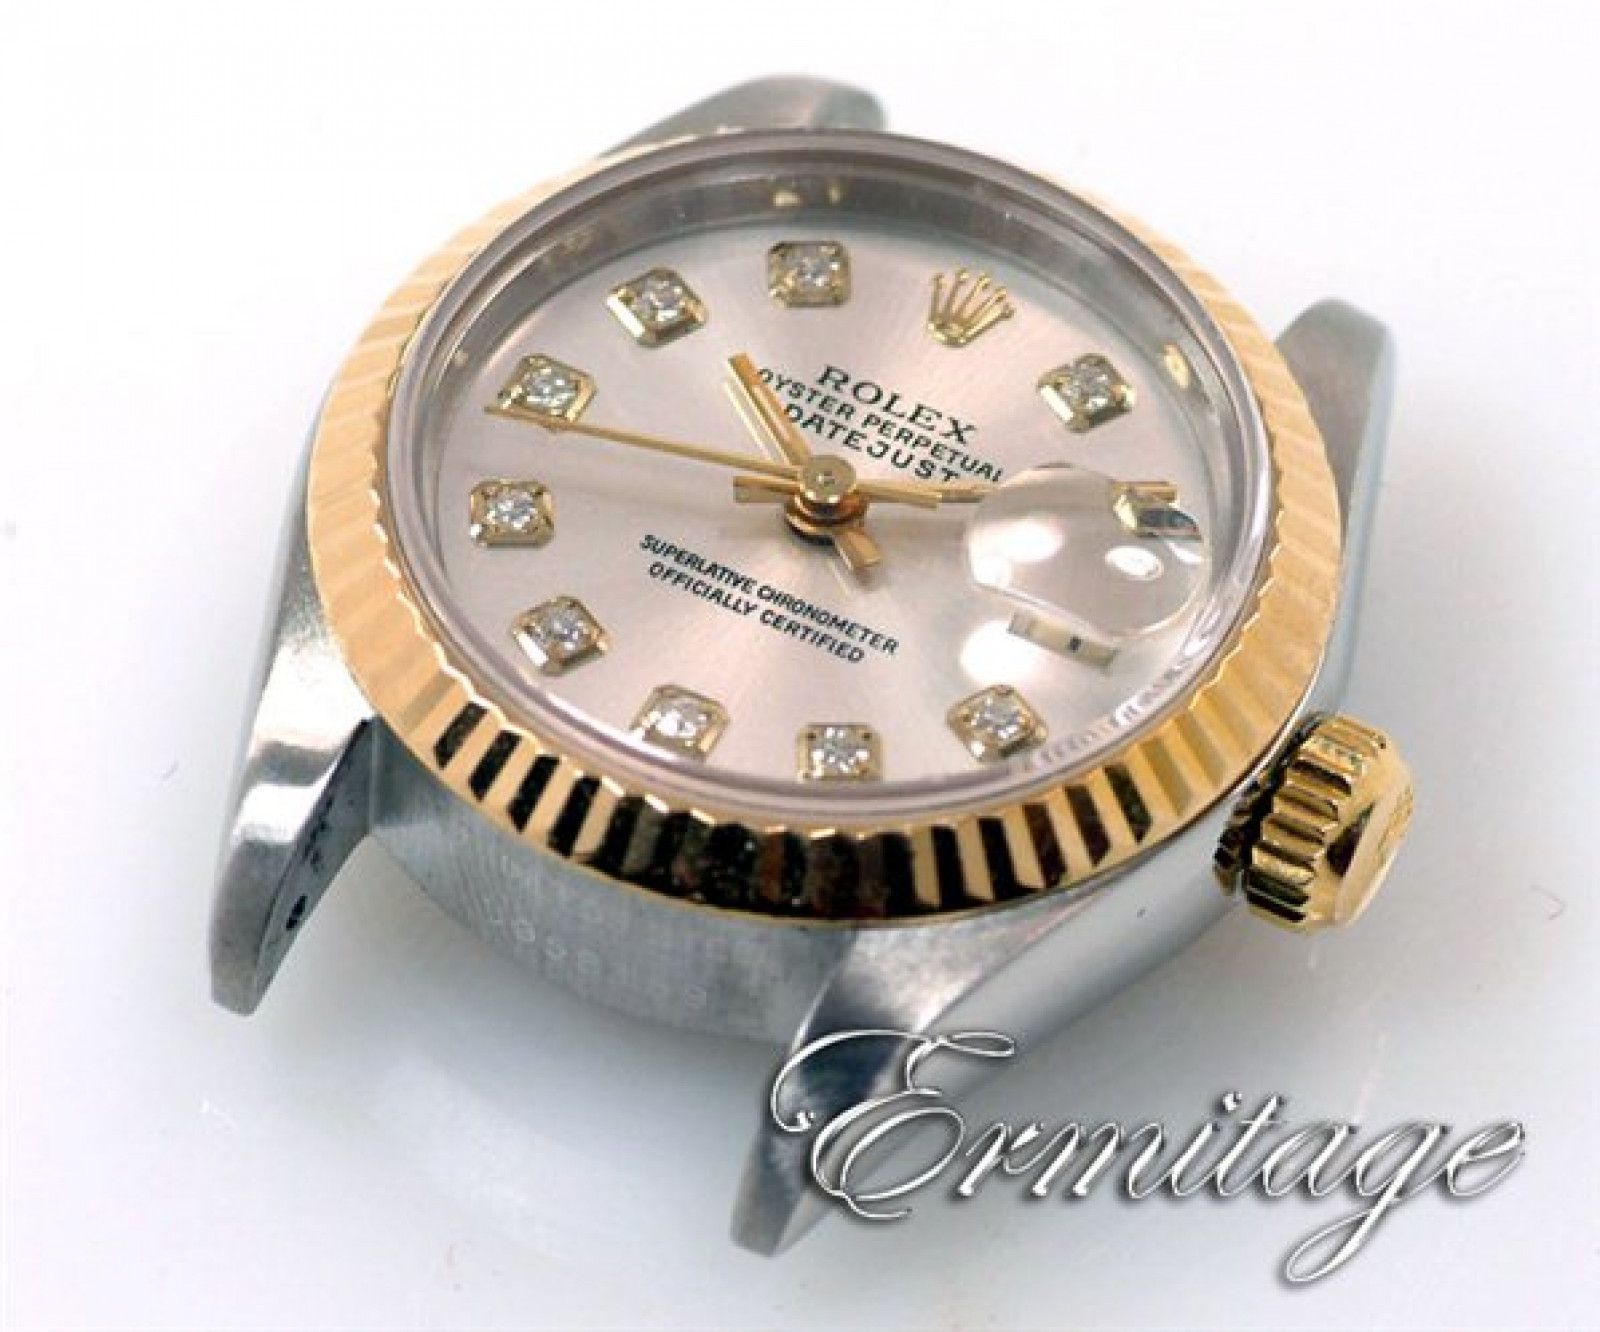 Rolex Datejust 69173 with Diamonds on Silver Dial